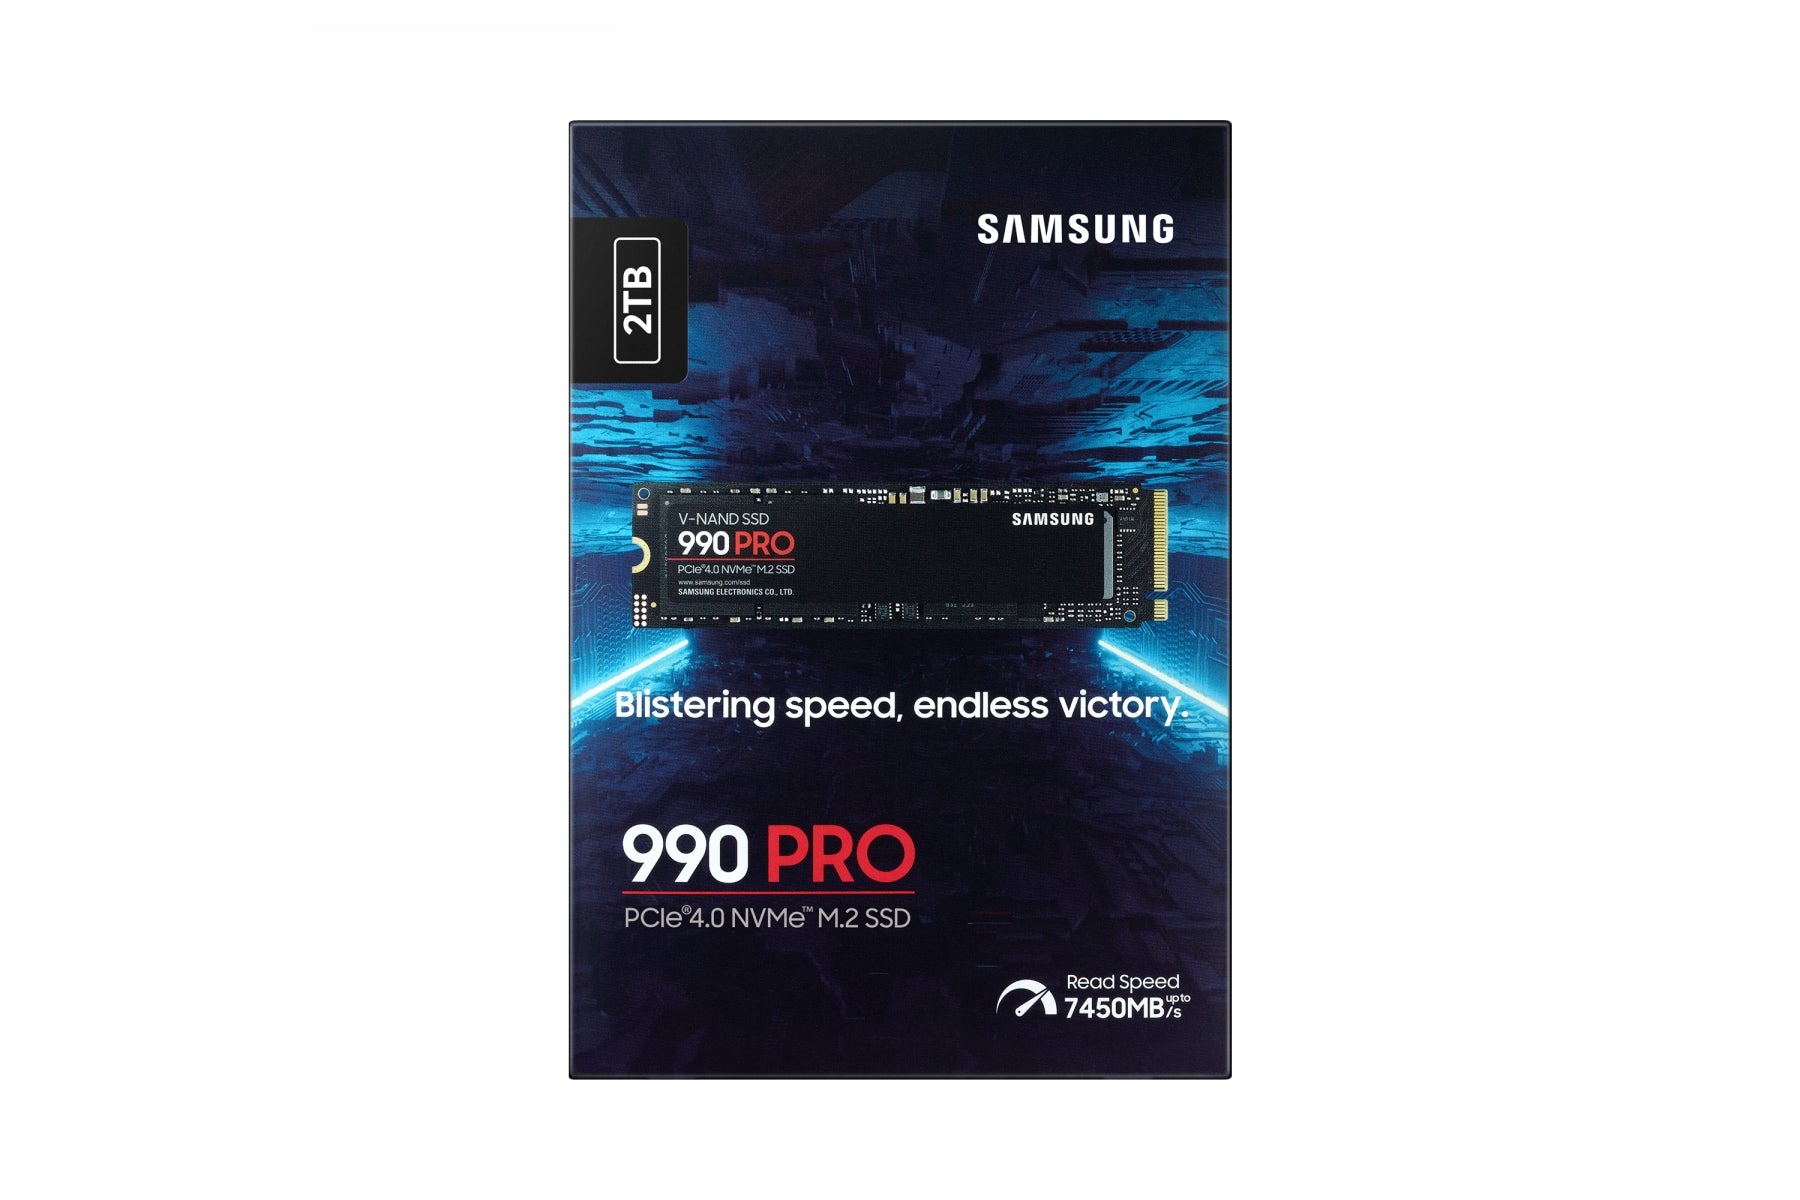 Samsung 990 Pro 2TB NVMe M.2 SSD, PCIe Gen 4.0, 7450 MB/s Sequential Read Speed, 6900 MB/s Sequential Write Speed, 3.3 Voltage, V-NAND 3-bit MLC MZ-V9P2T0BW